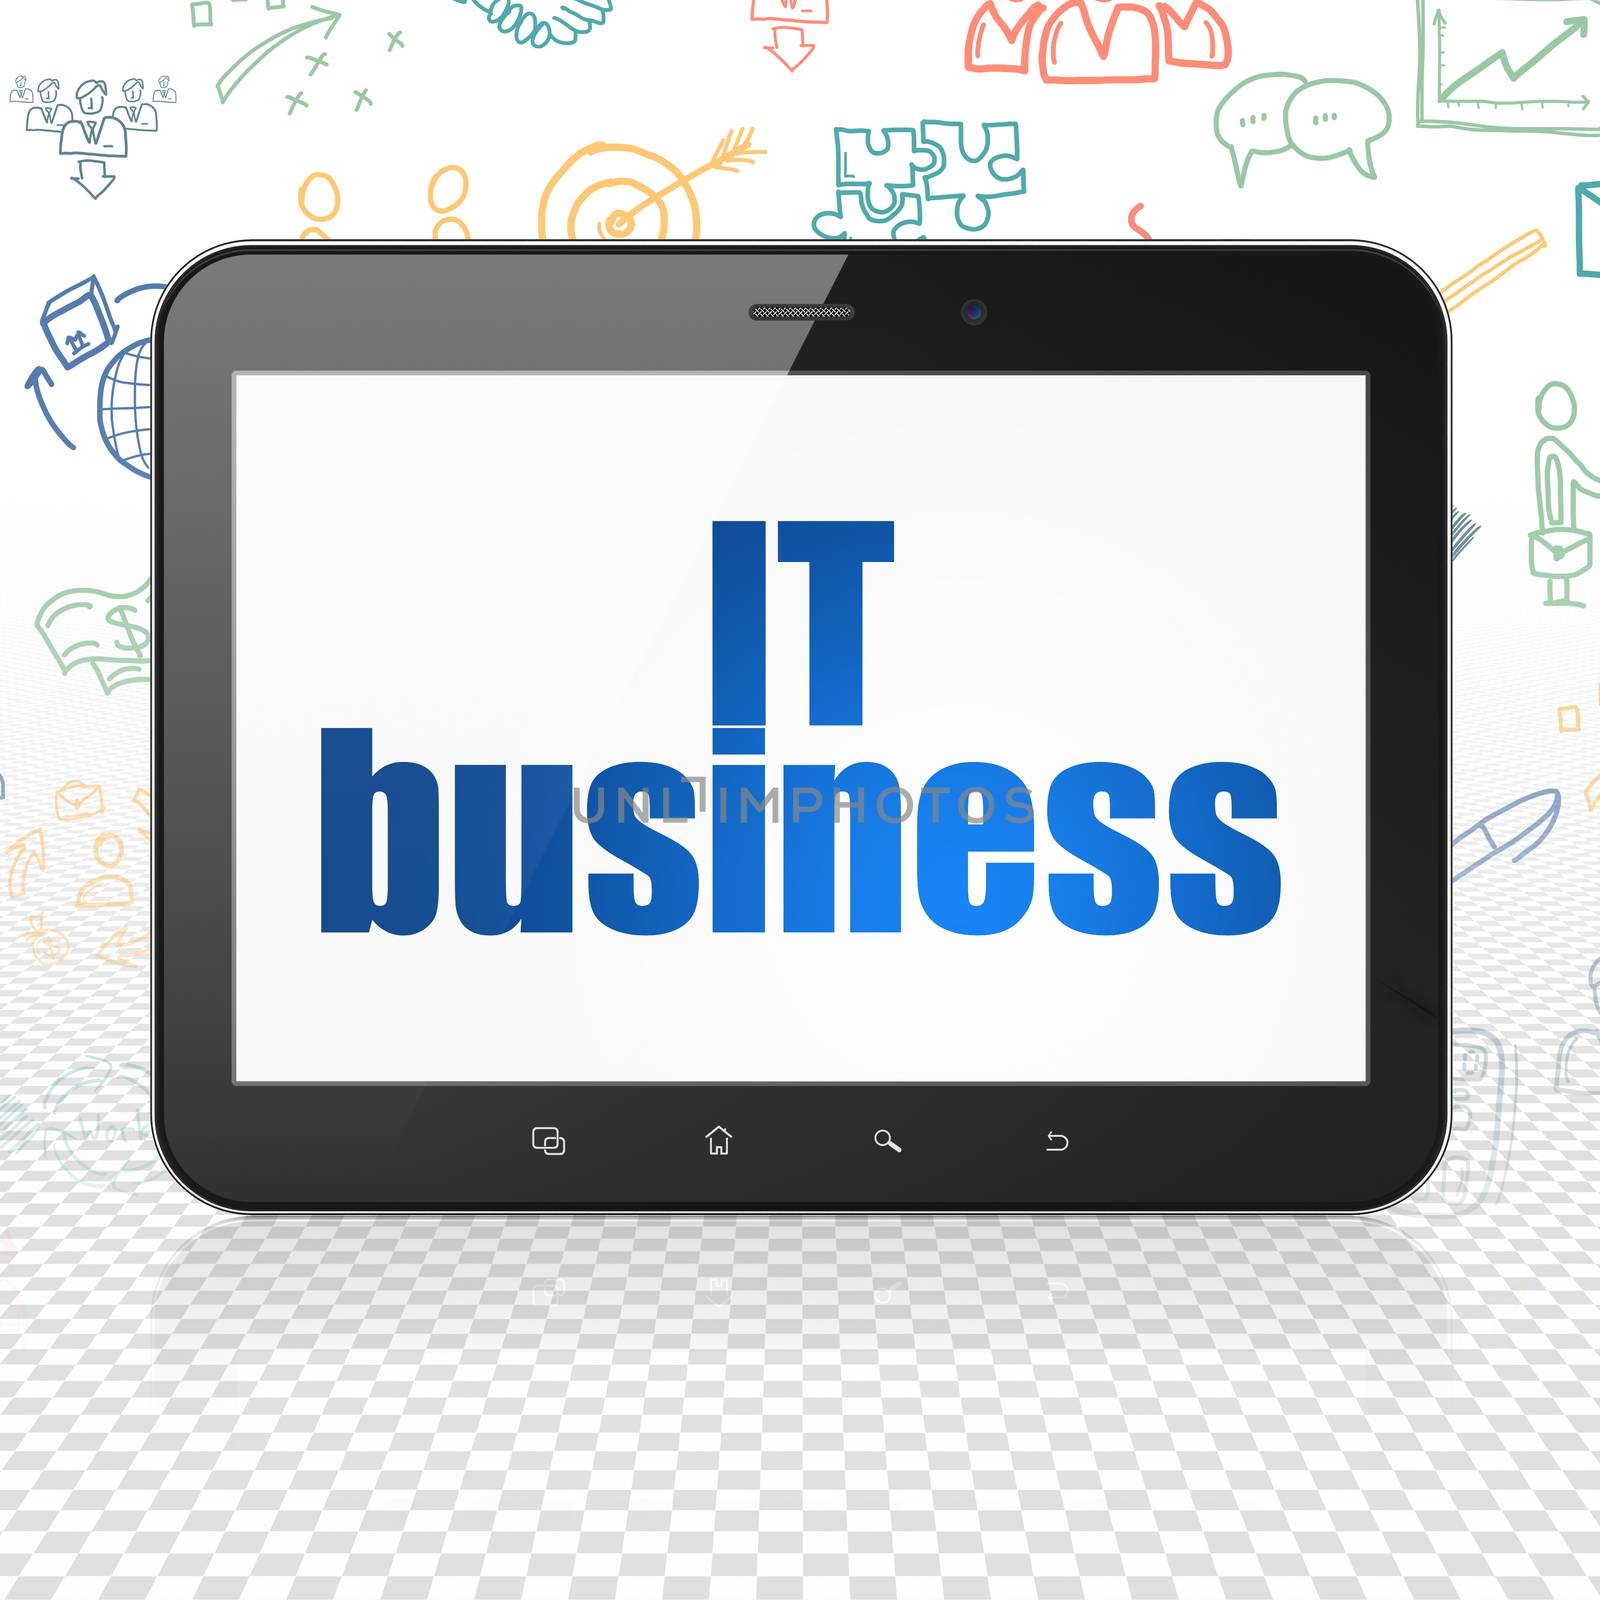 Finance concept: Tablet Computer with  blue text IT Business on display,  Hand Drawn Business Icons background